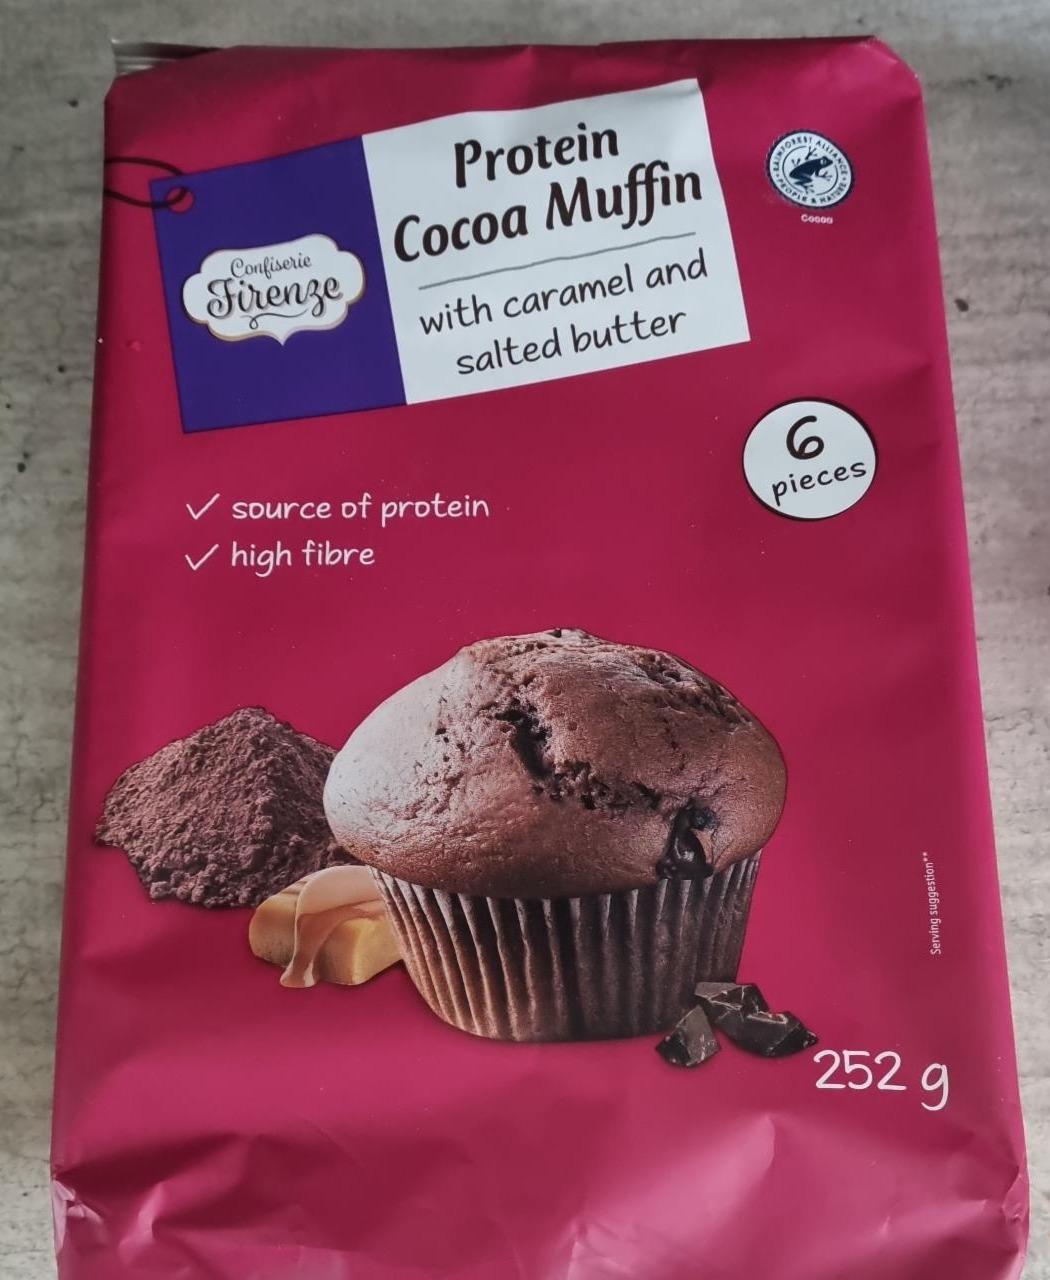 Fotografie - Protein Cocoa Muffin with caramel and salted butter Confiserie Firenze